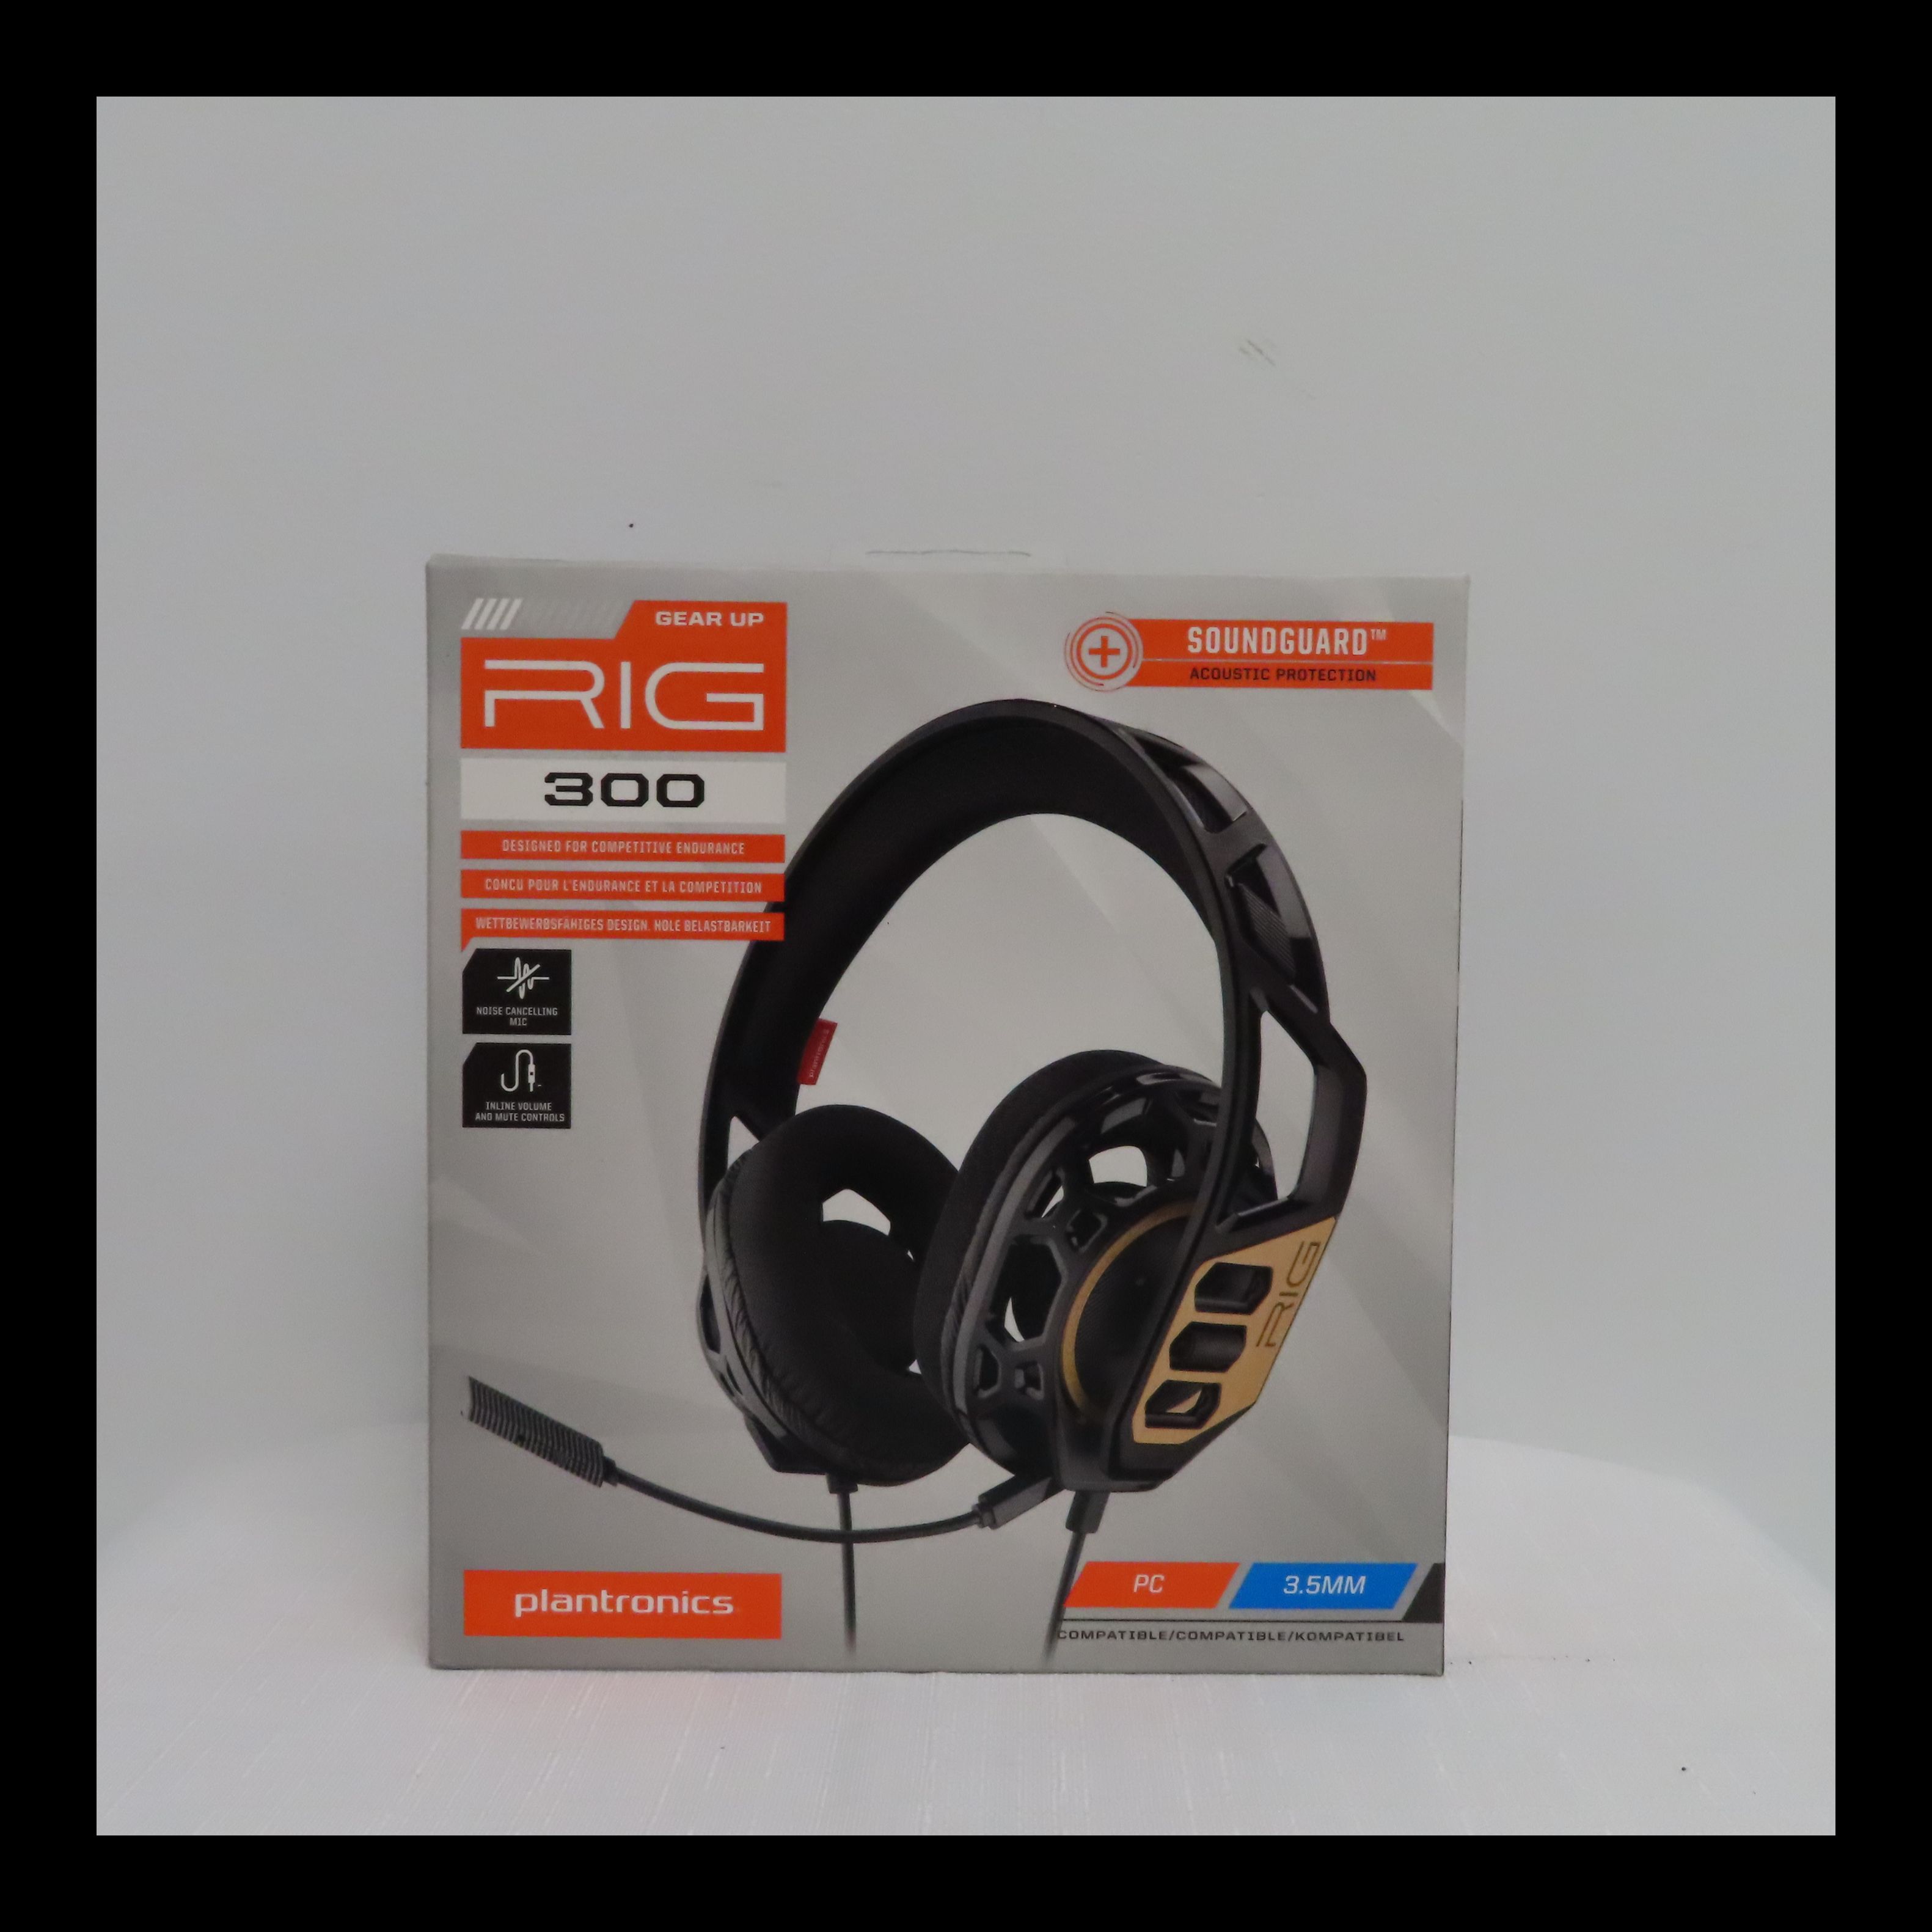 rig 300 headset